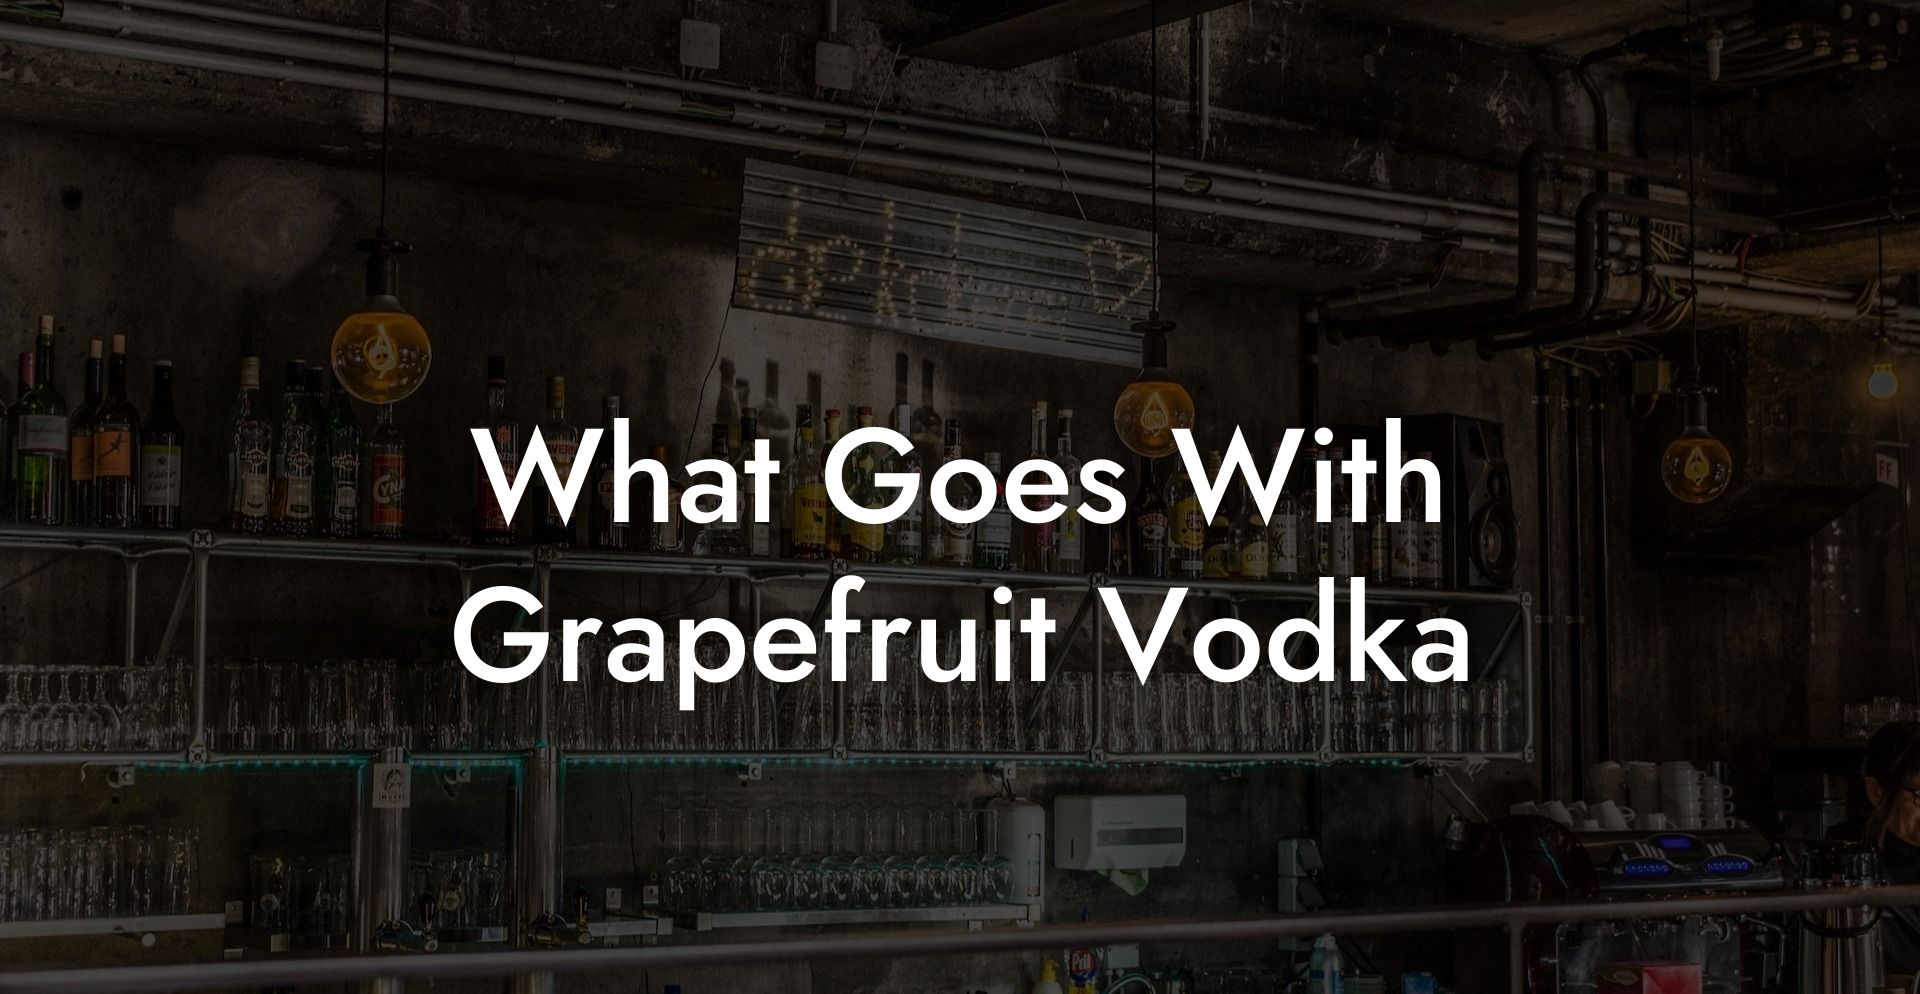 What Goes With Grapefruit Vodka